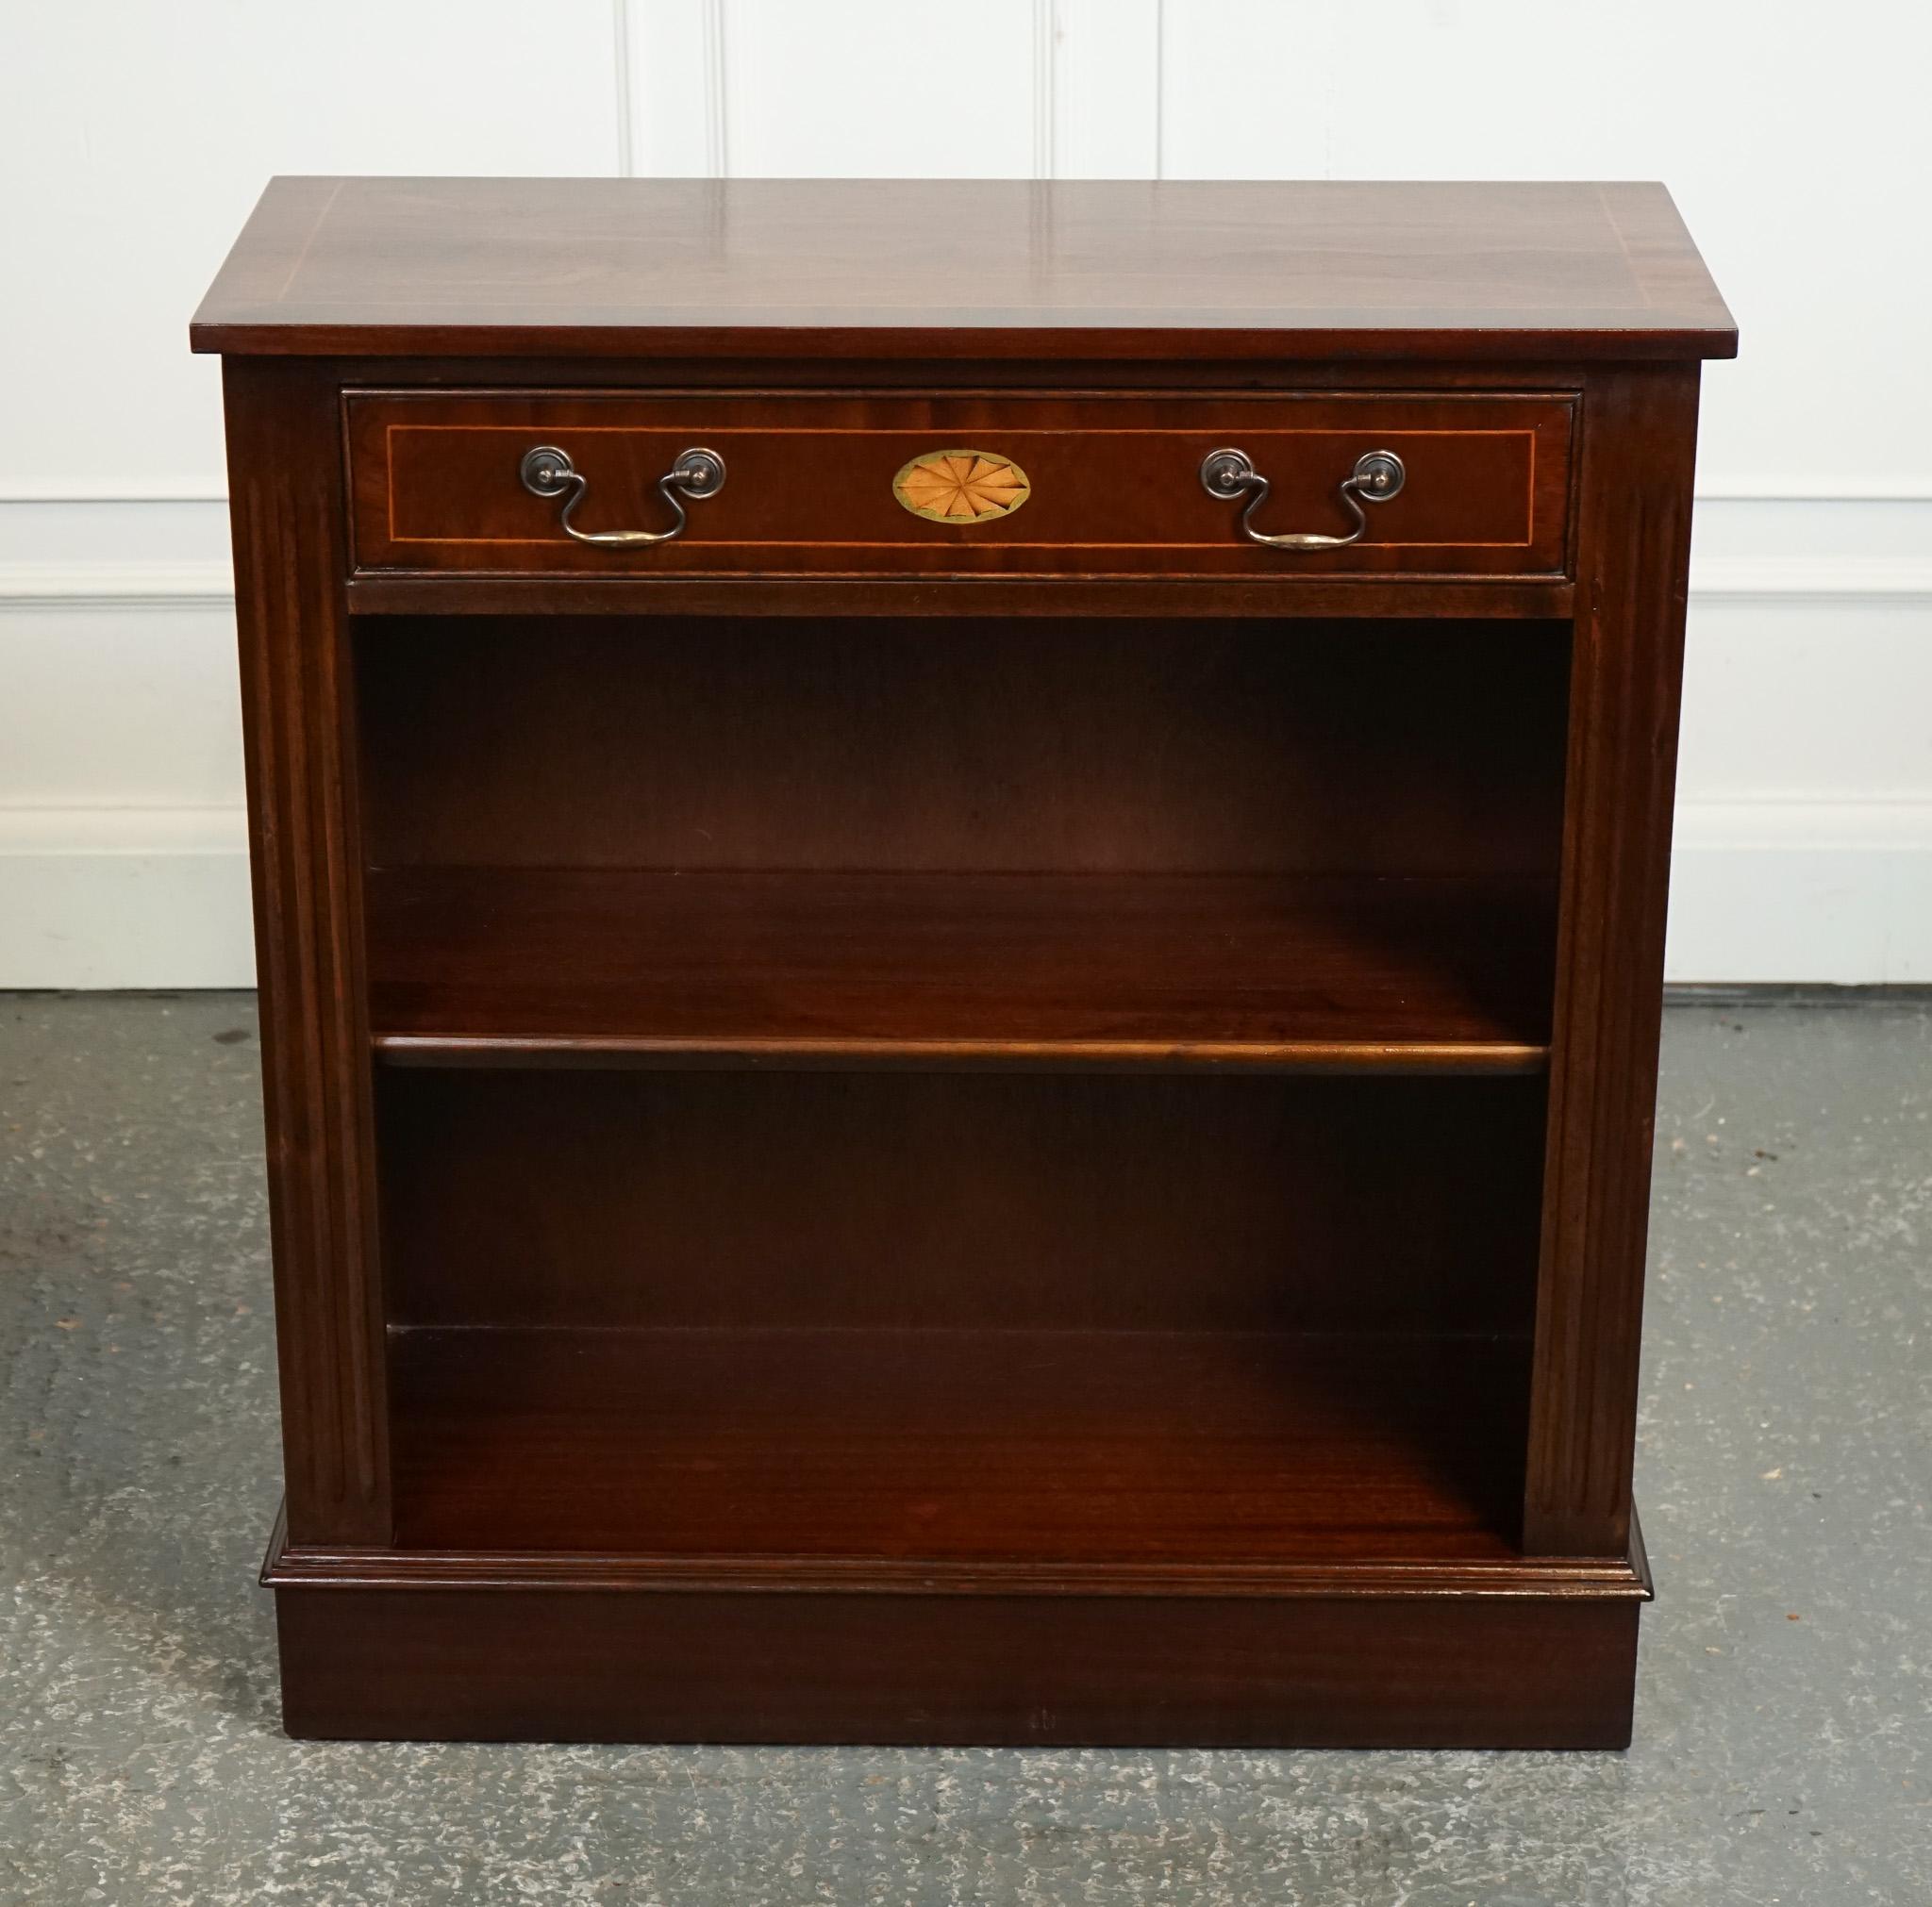 Hand-Crafted VINTAGE SHERATON DWARF OPEN BOOKCASE WITH ADJUSTABLE SHELVE j1 For Sale